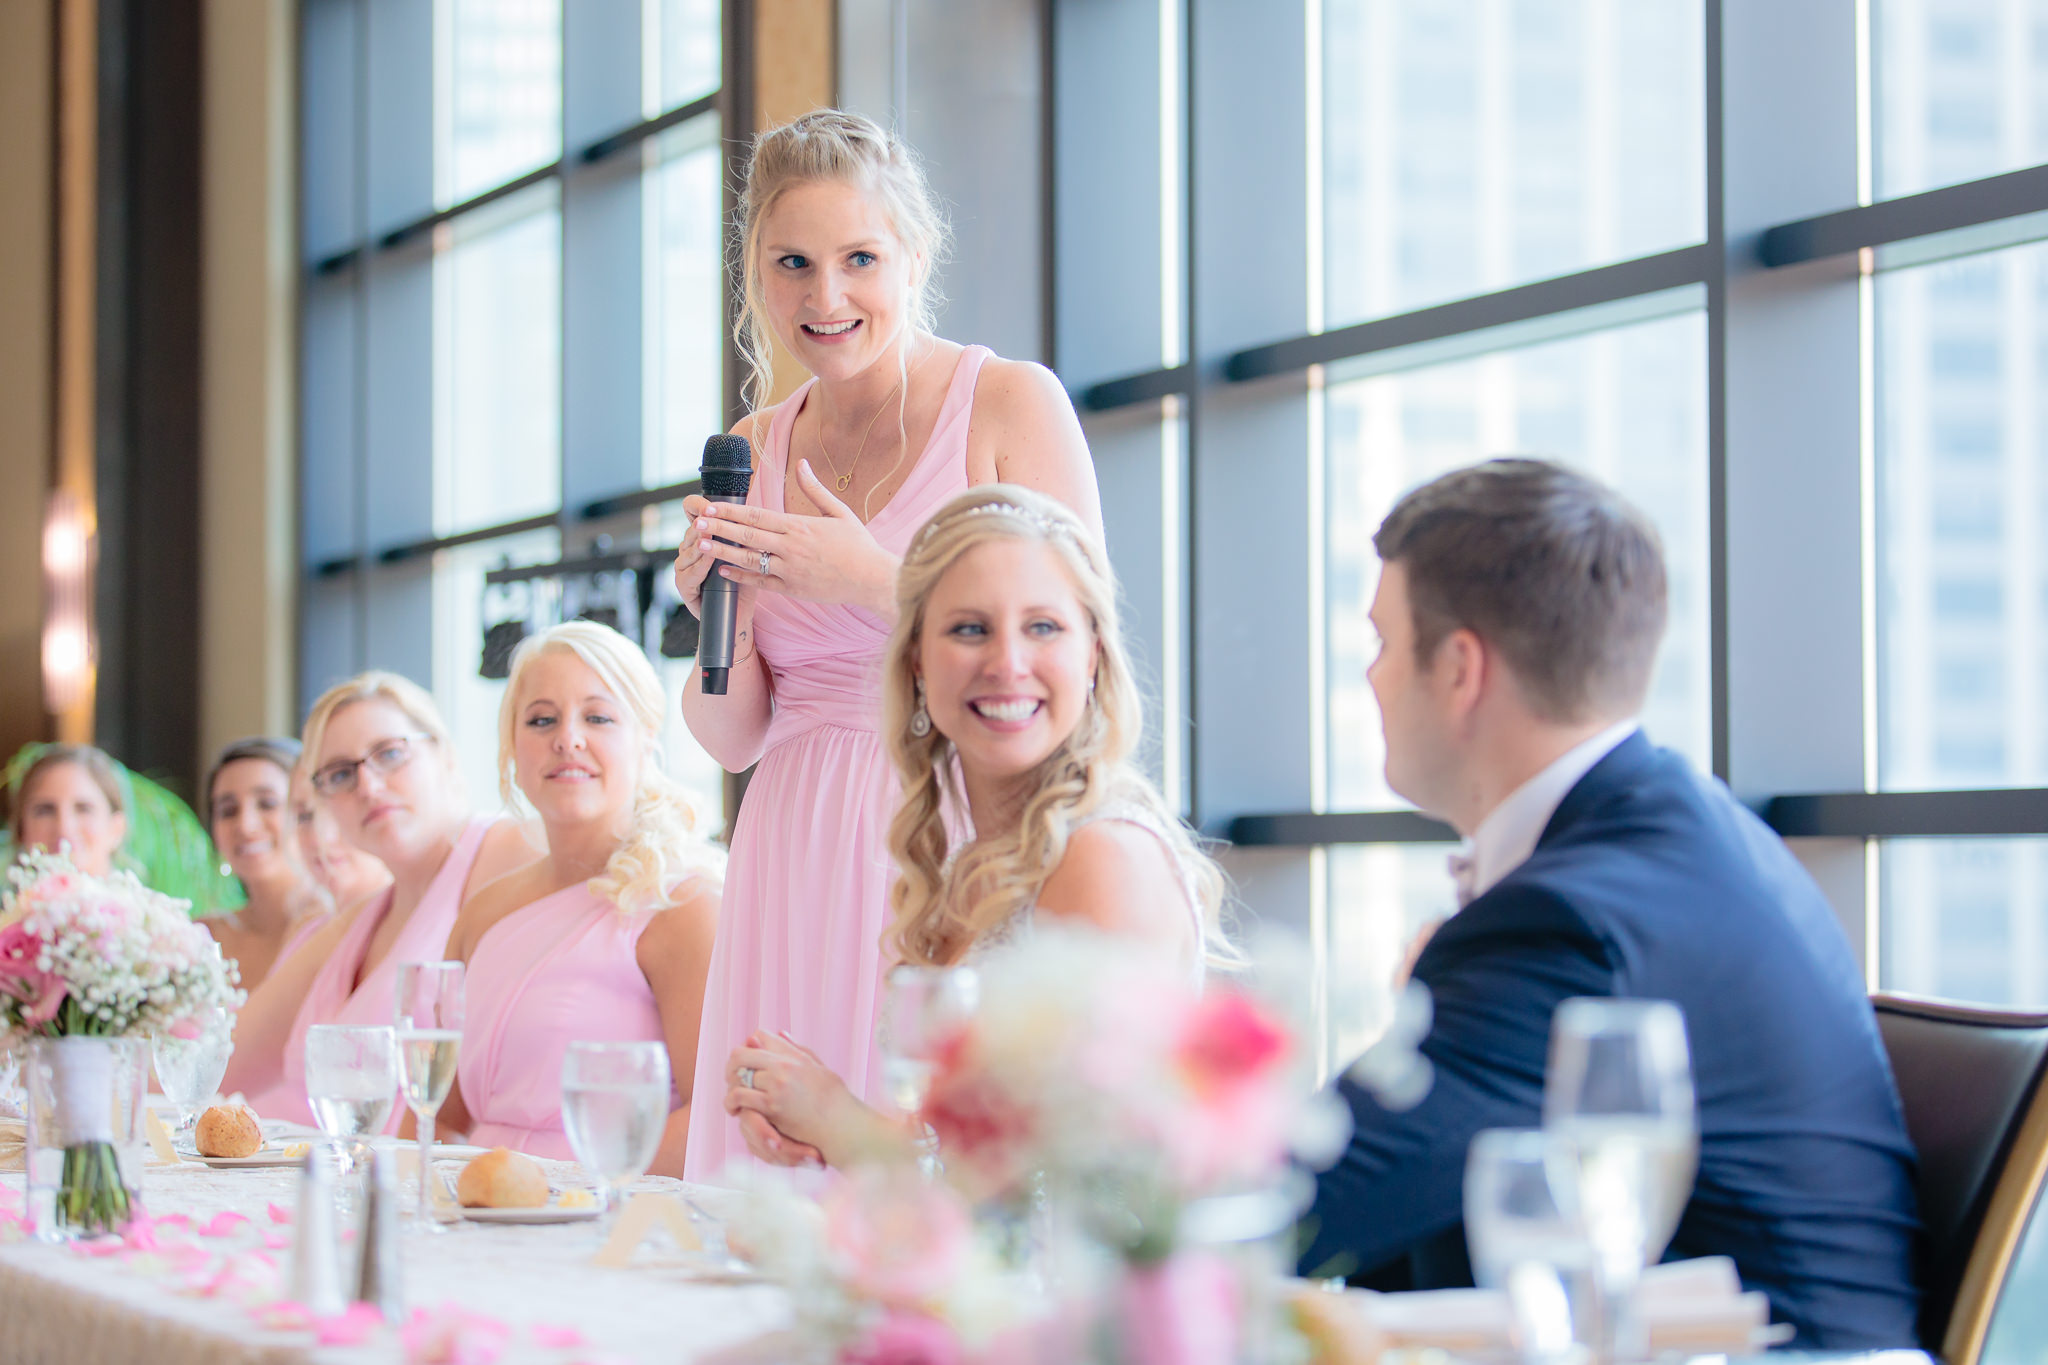 Matron of honor toasts the newlyweds at Duquesne University